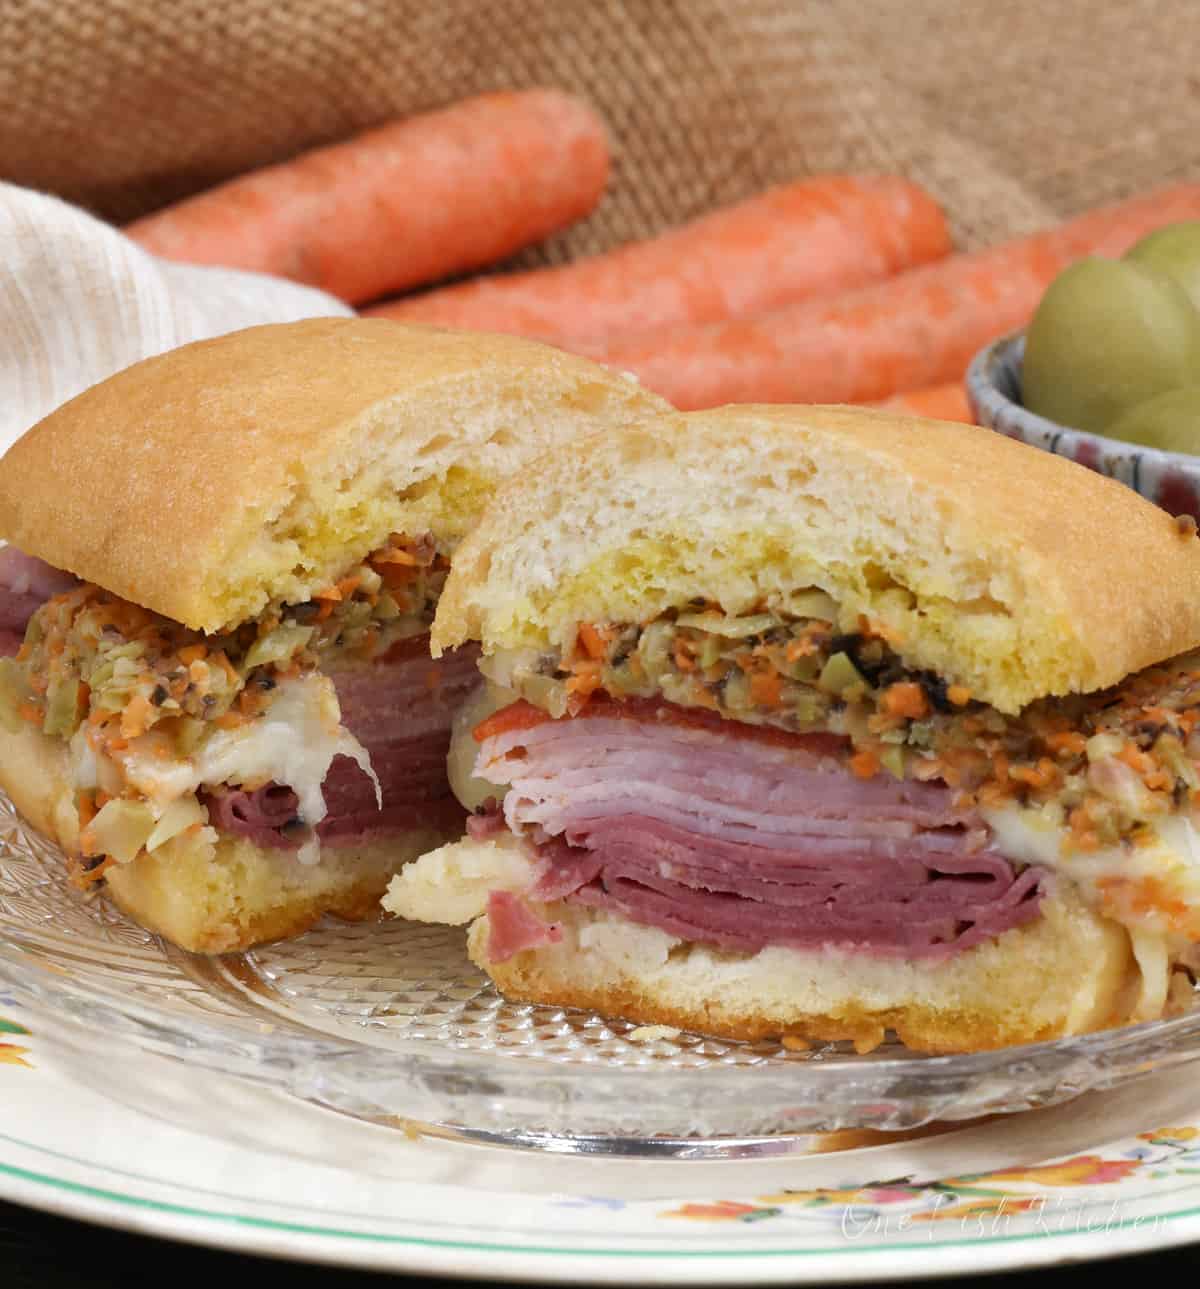 a muffuletta sliced in half next to 3 carrots and a bowl of olives